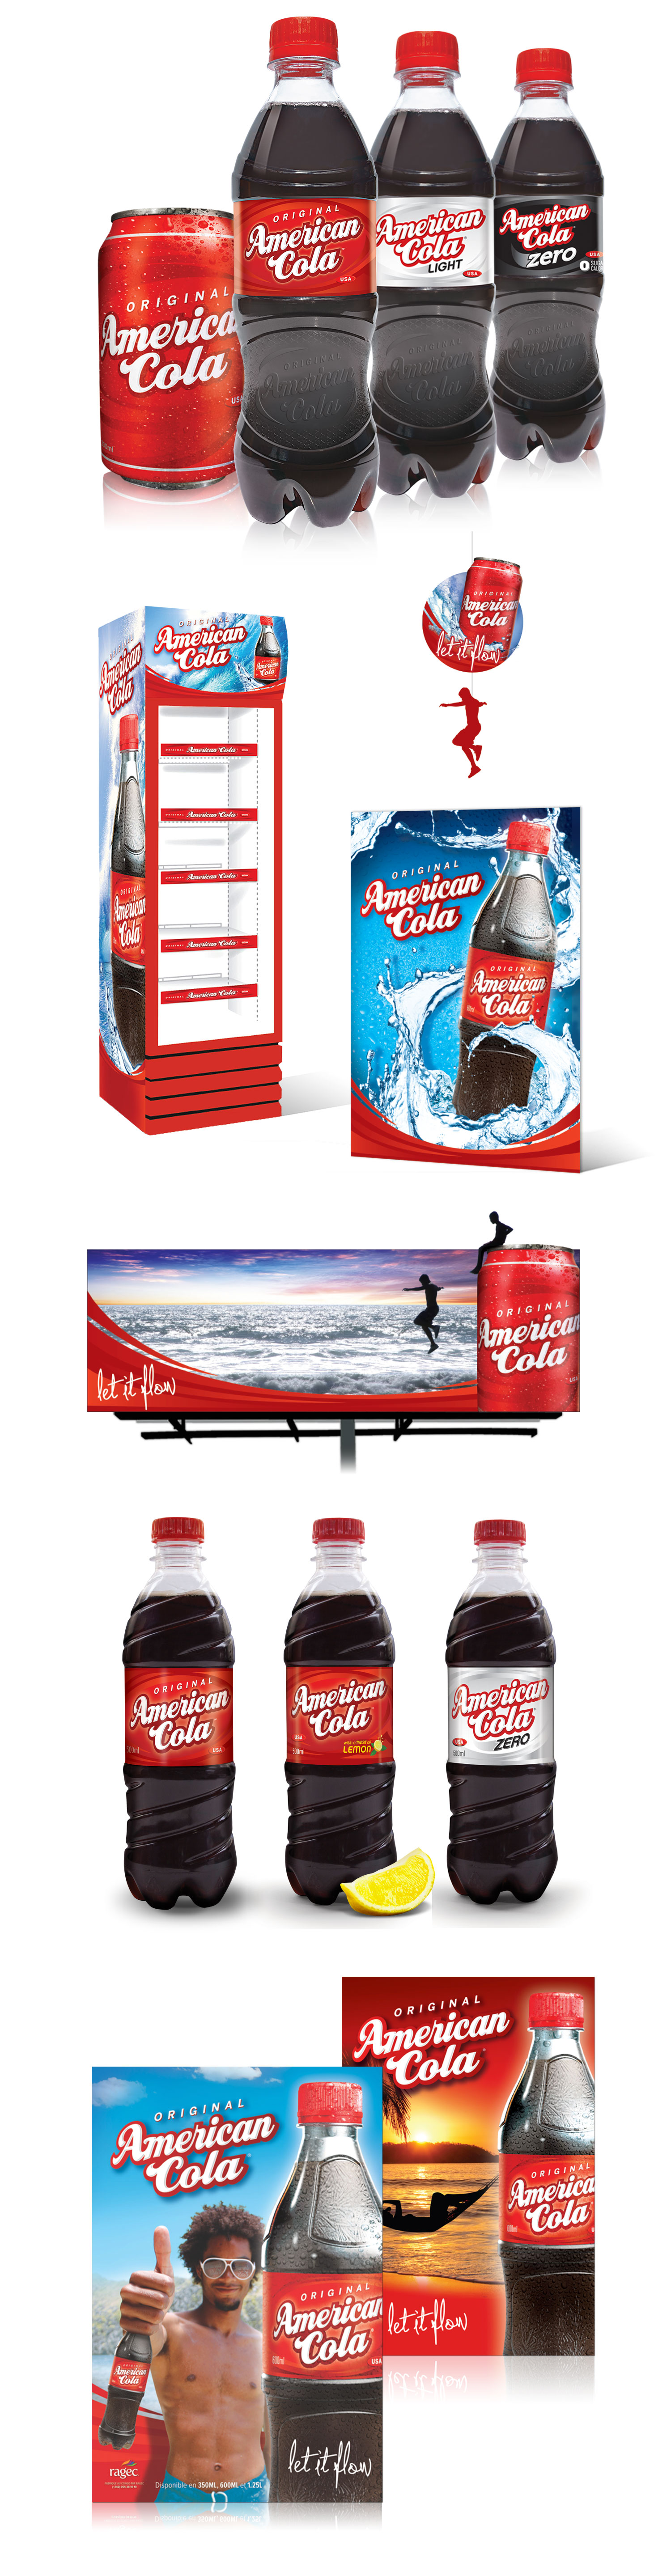 American Cola Packaging Design and Promotion